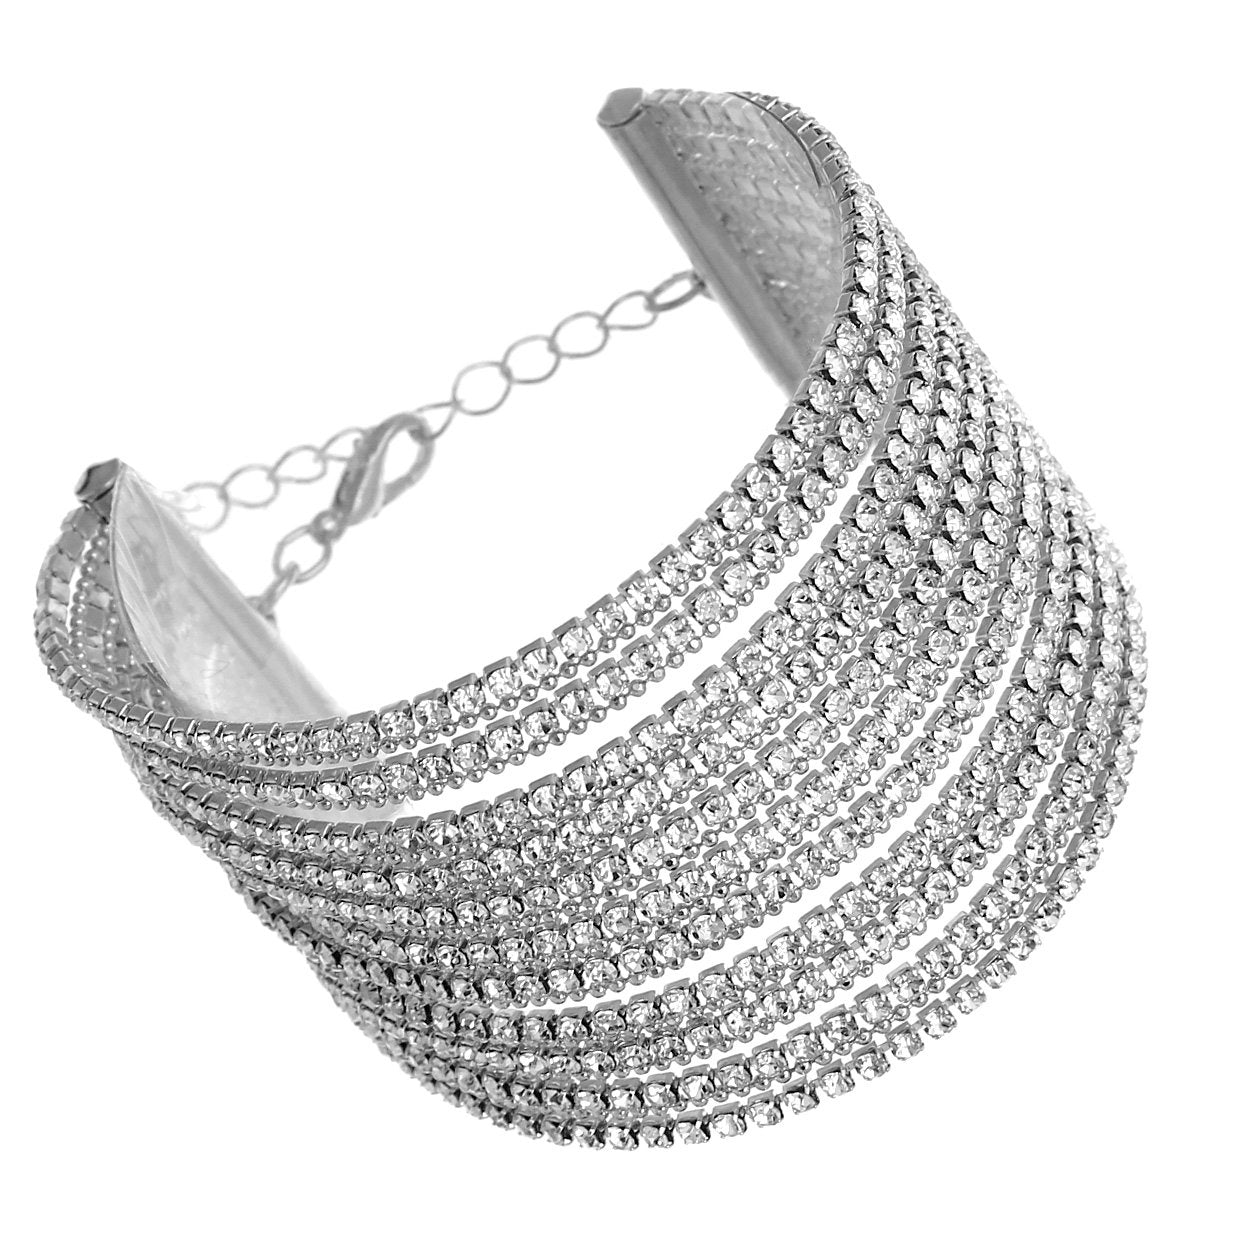 Sterling Silver Statement Bracelet with Foxtail Chains by Anatoli